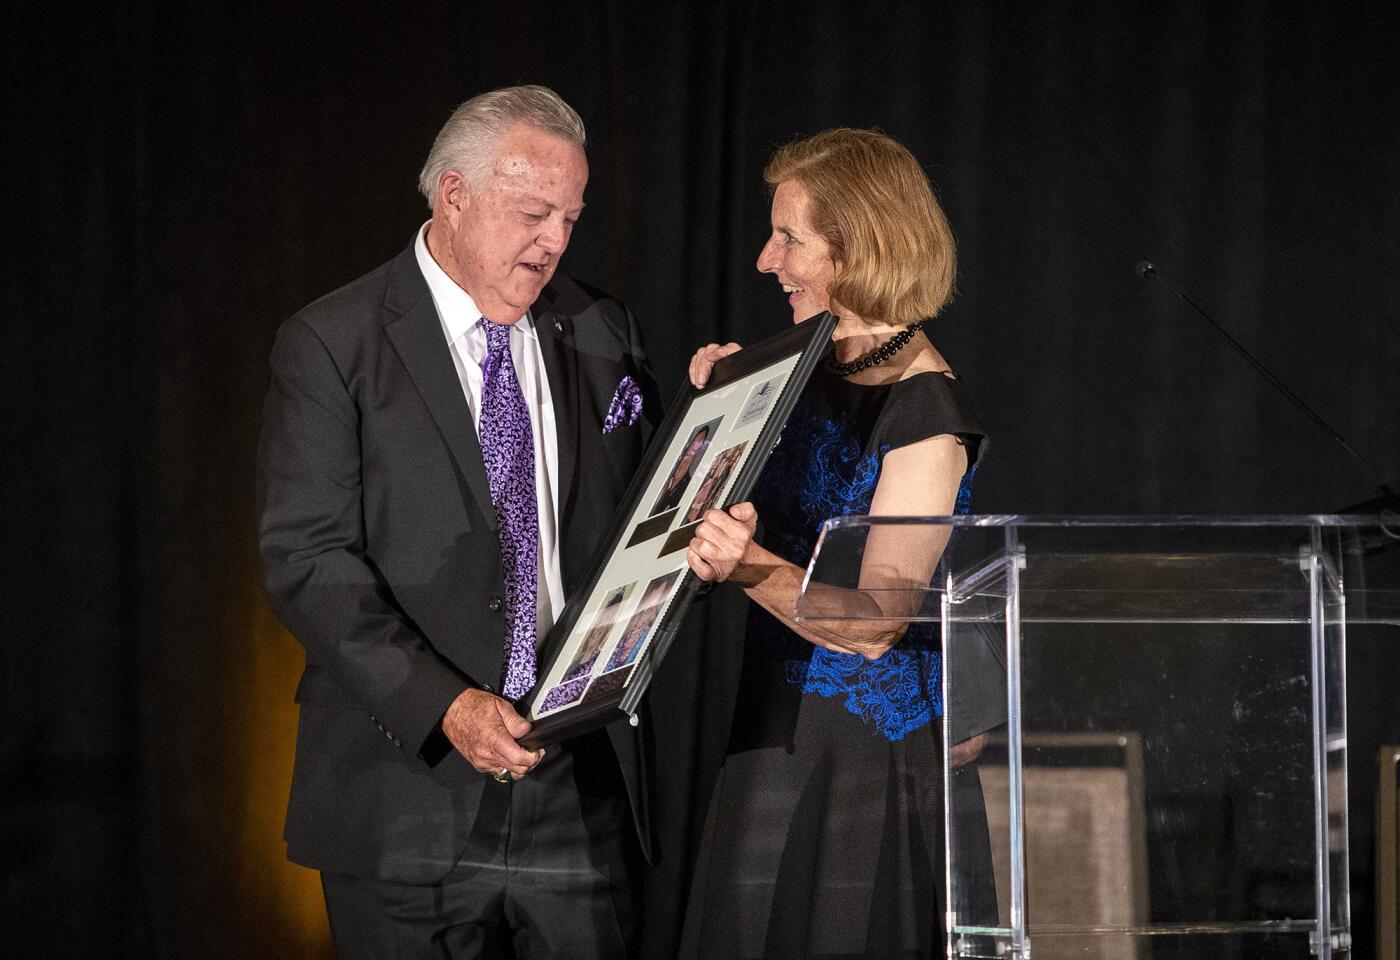 Costa Mesa Mayor Sandy Genis presents former police chief Dave Snowden with the Art of Leadership award during the annual Art of Leadership Mayor's Celebration dinner Thursday.